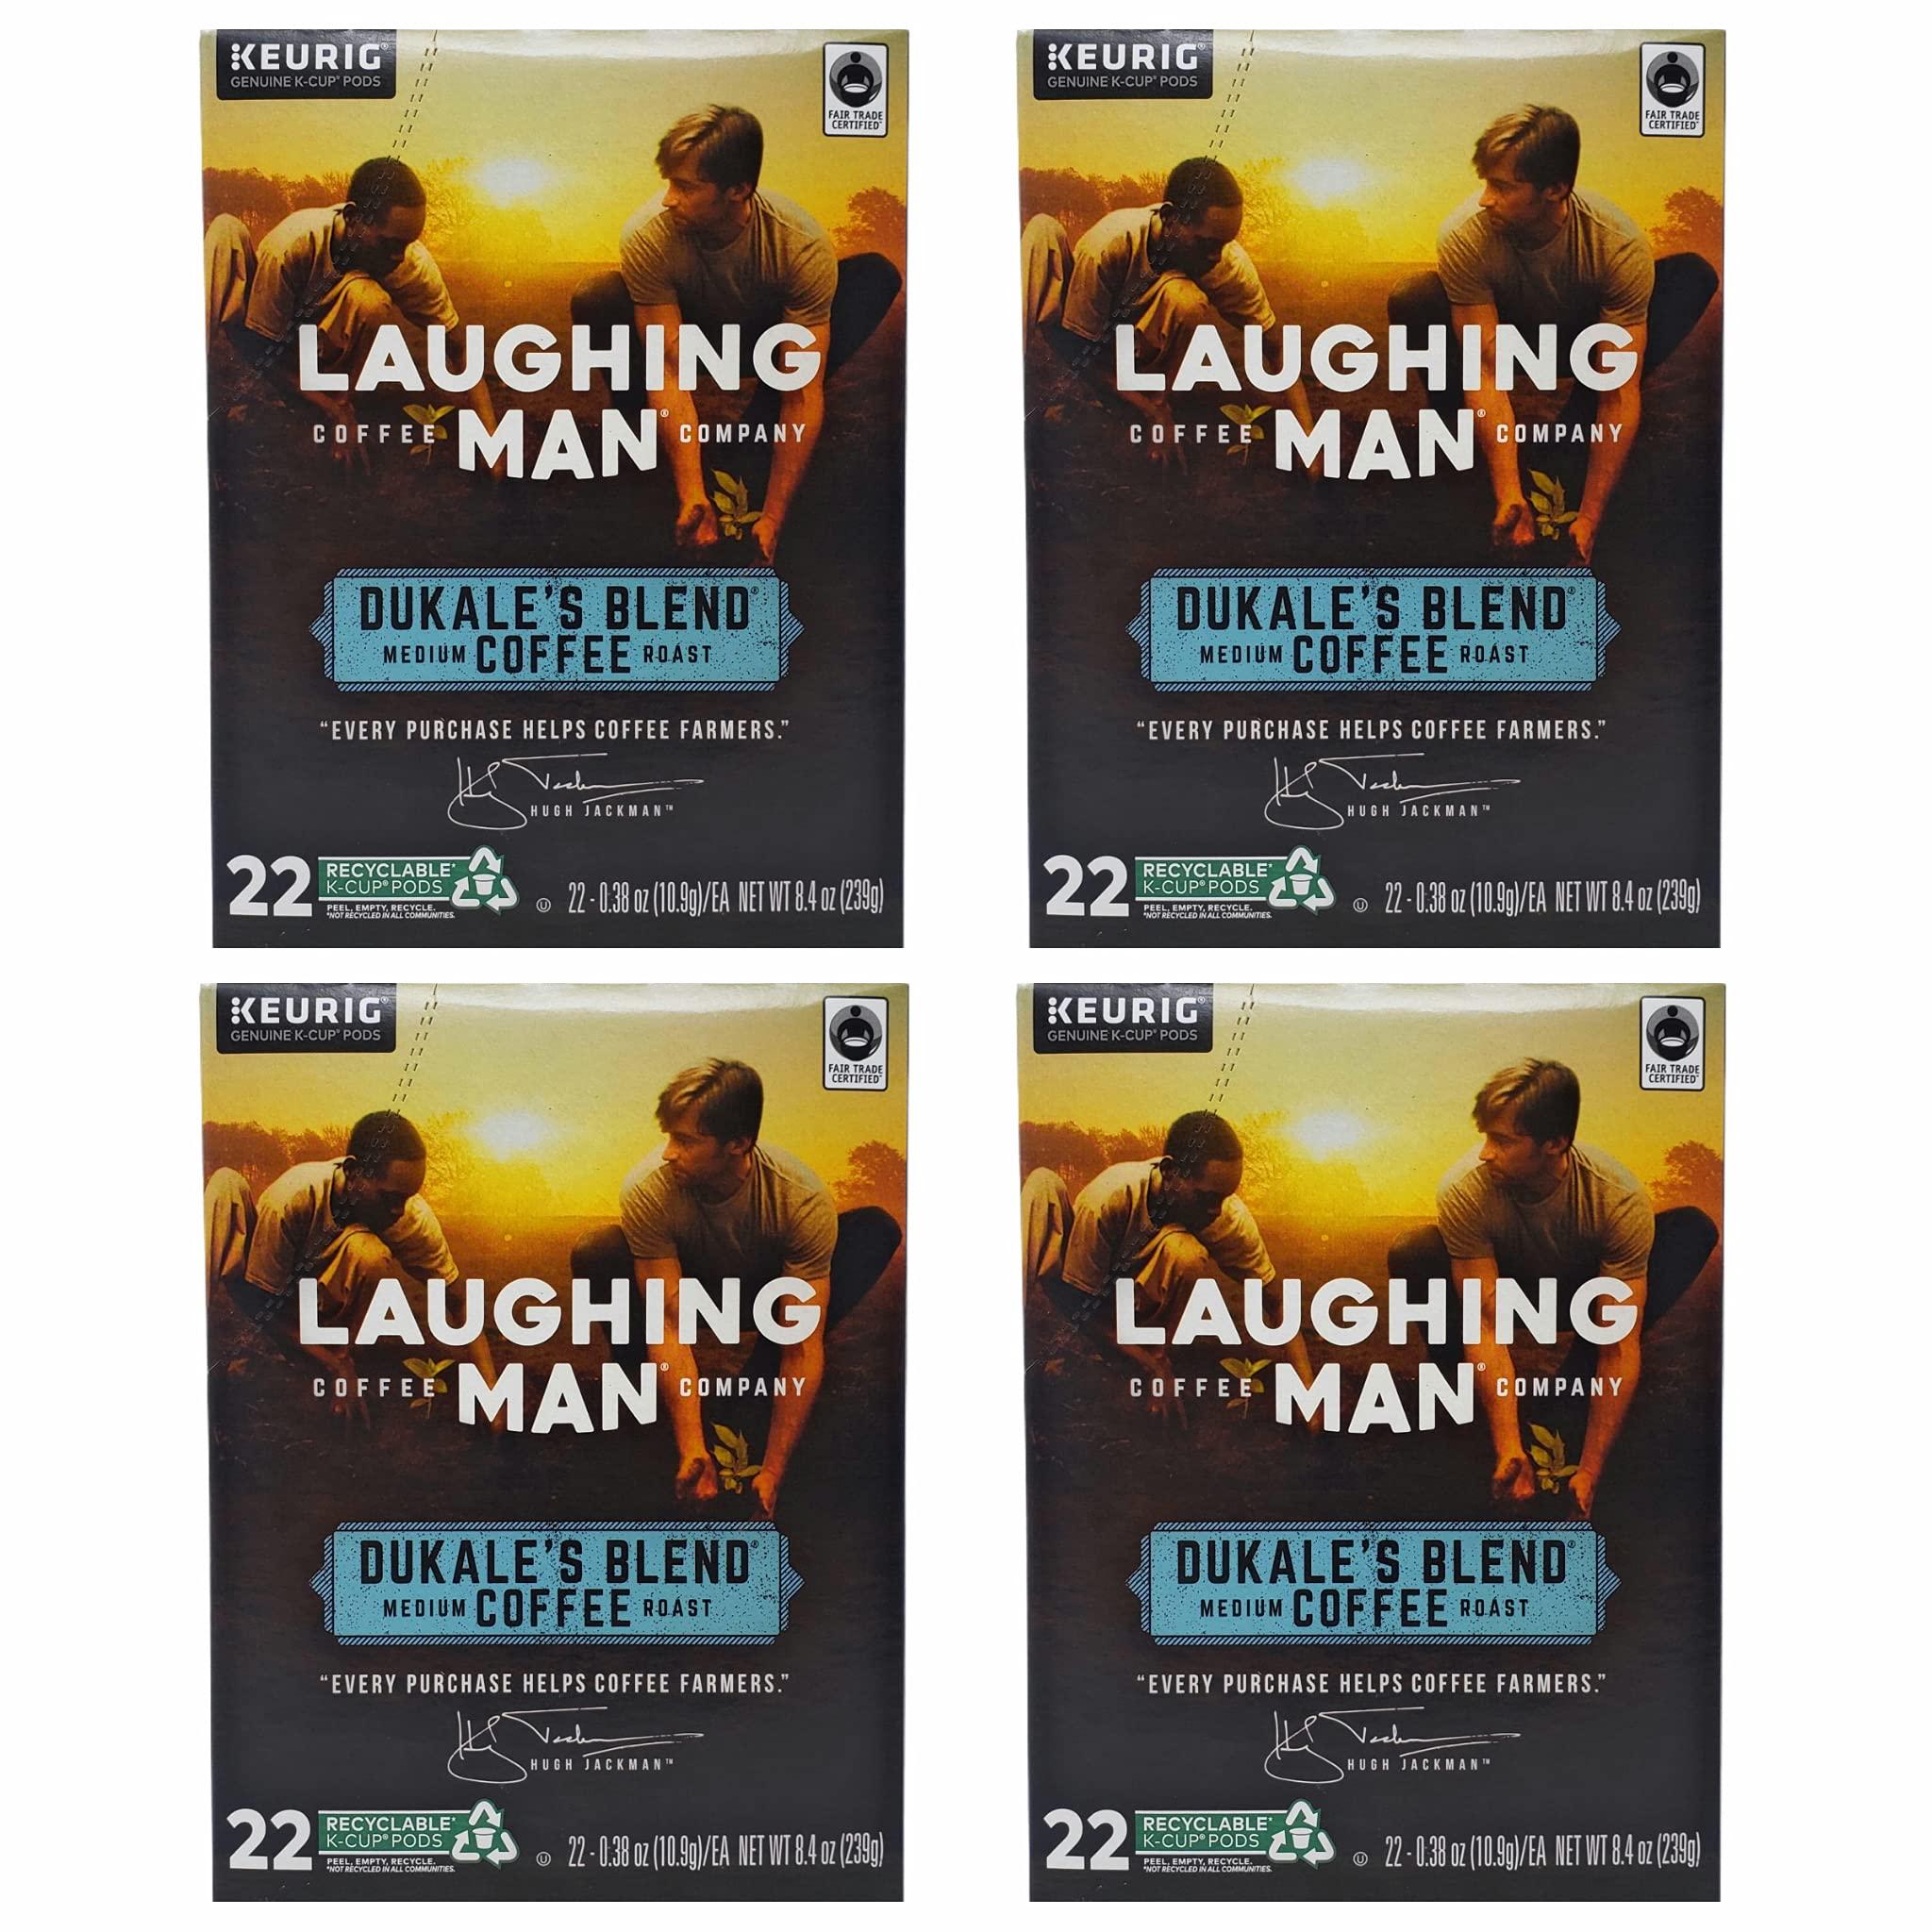 laughing man coffee k cups - dukales blend coffee - pack of 88 k cups - comes in 4 boxes - medium roast coffee - for use of k